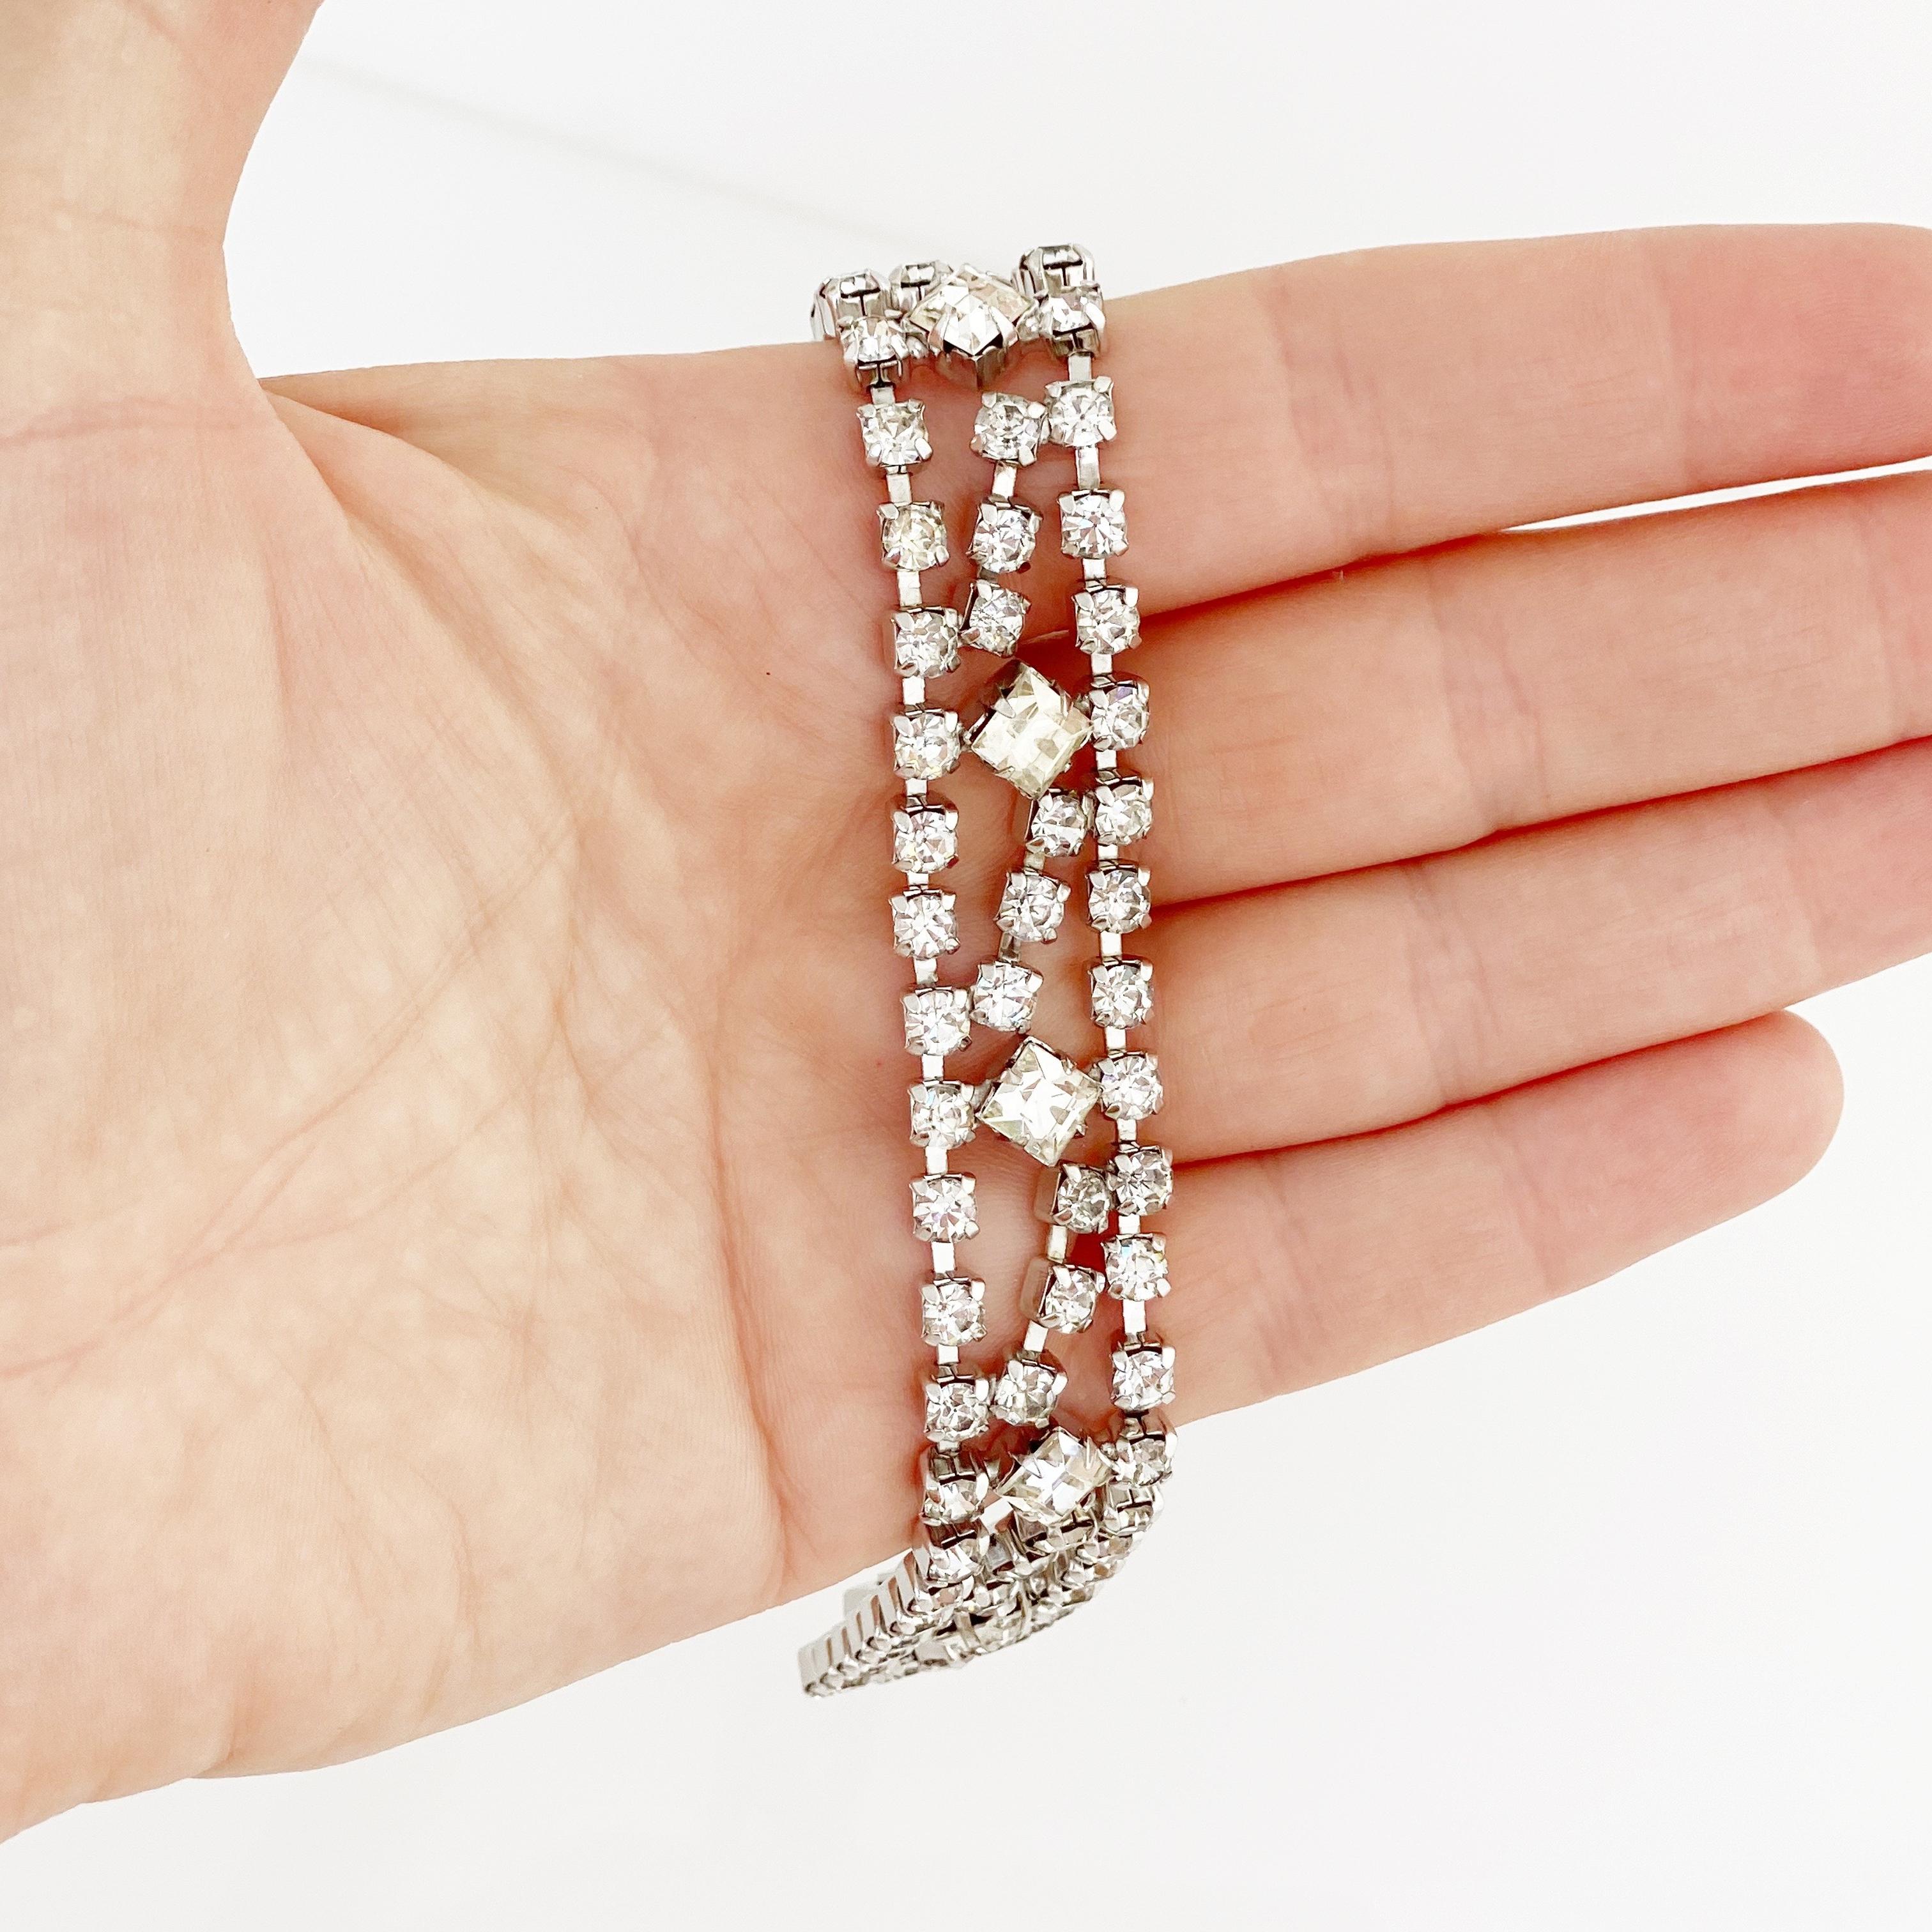 Square Cut Crystal Rhinestone Cocktail Bracelet By Warner, 1950s For Sale 2